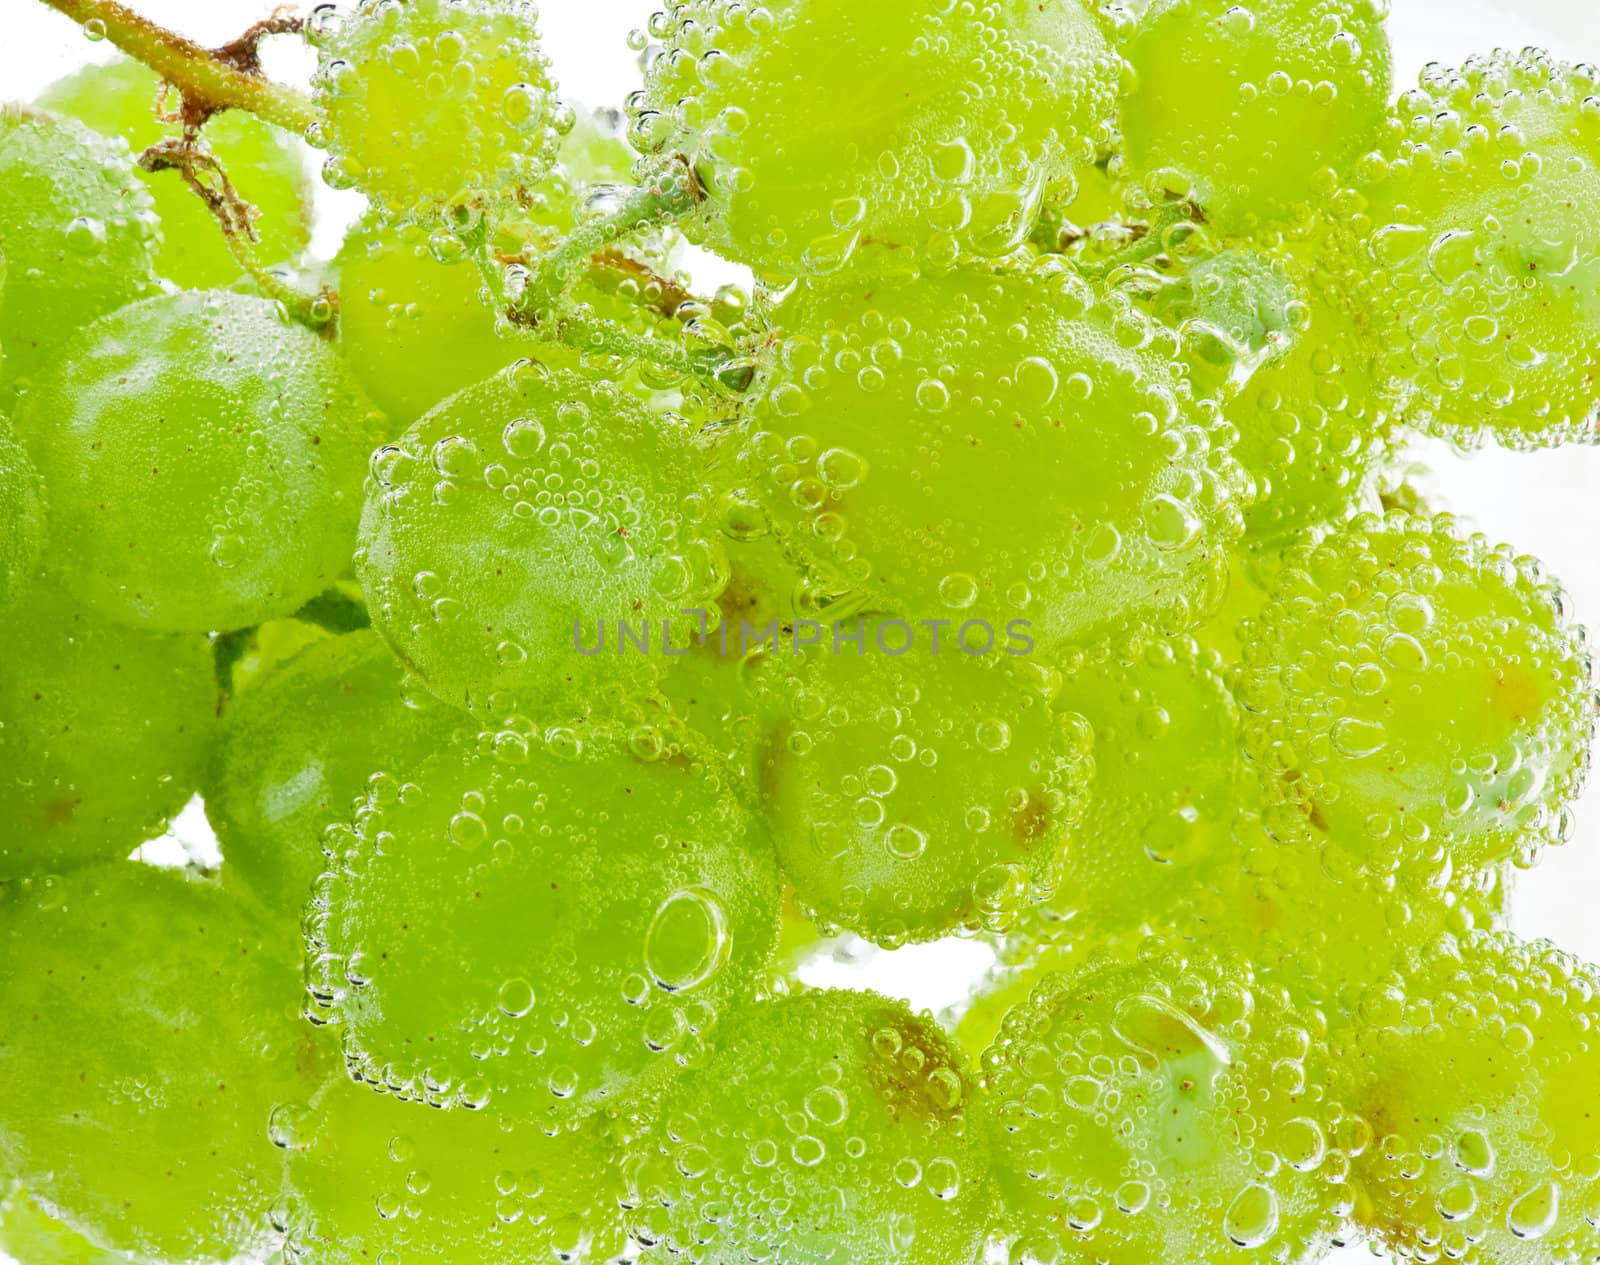 Grapes in water with bubbles